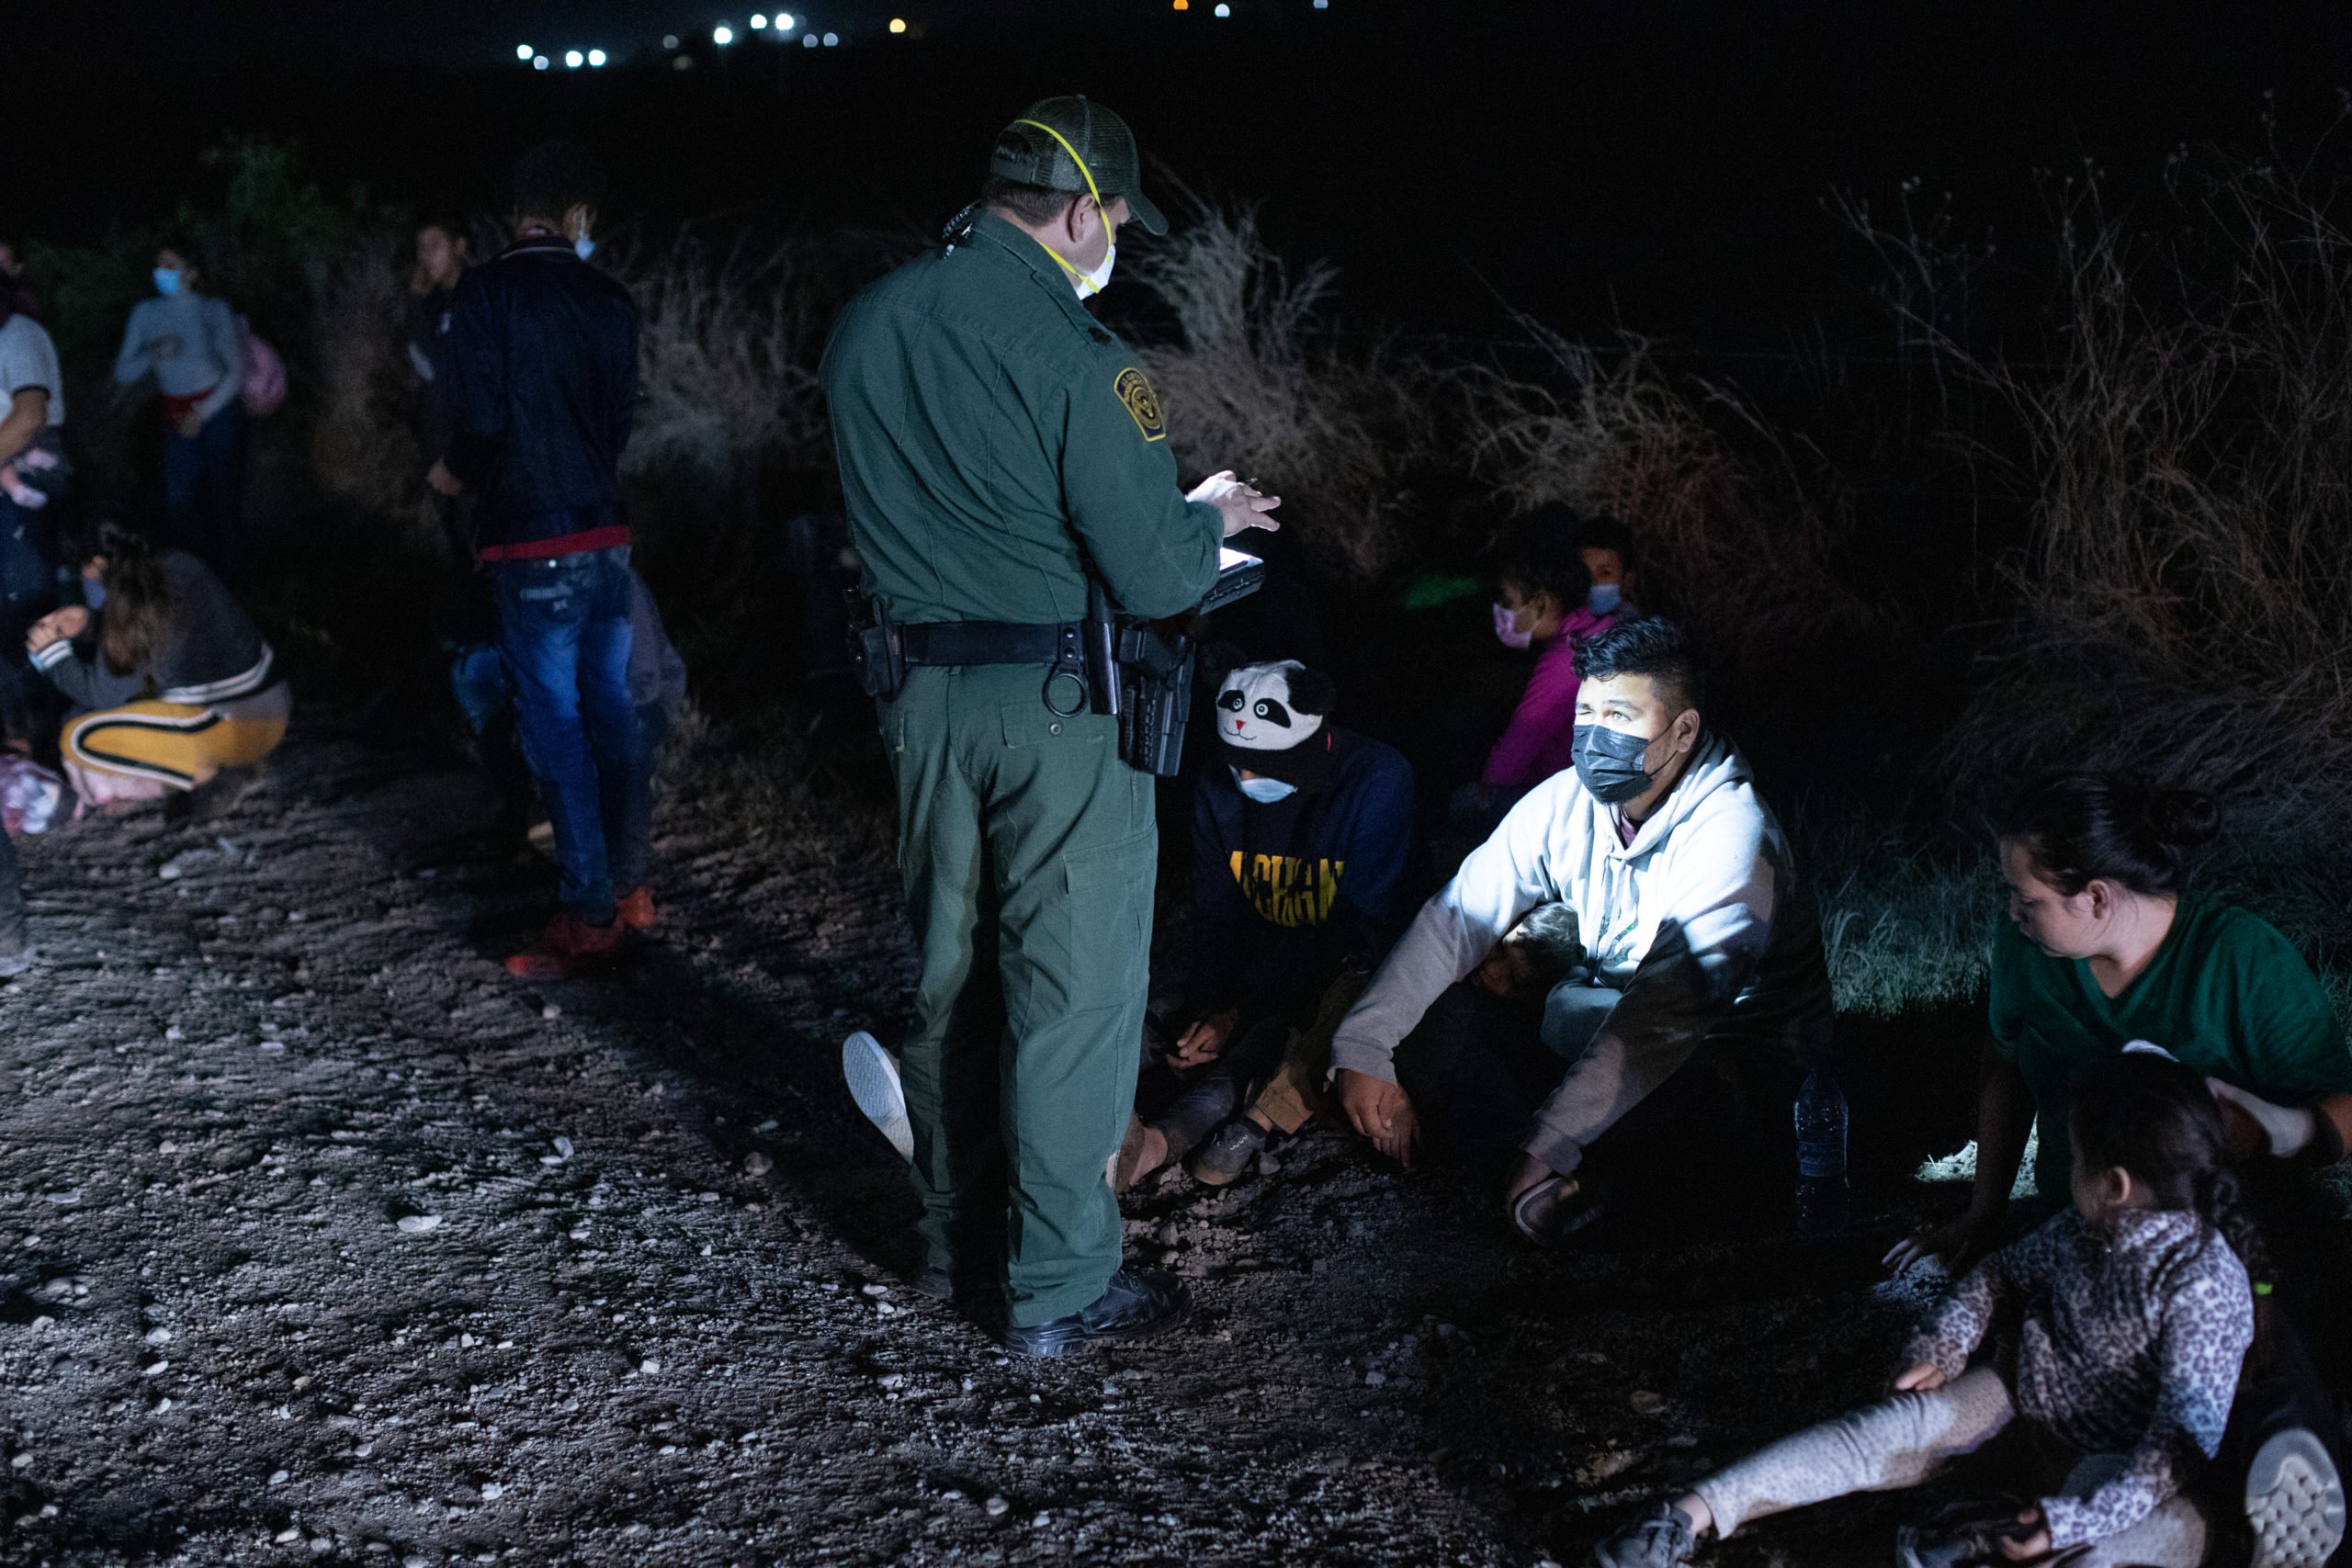 Several illegal migrants waited on the grass near the side of a public road as Customs and Border Protection officials worked to process the groups in La Joya, Texas on March 27, 2021. (Kaylee Greenlee - Daily Caller News Foundation) 